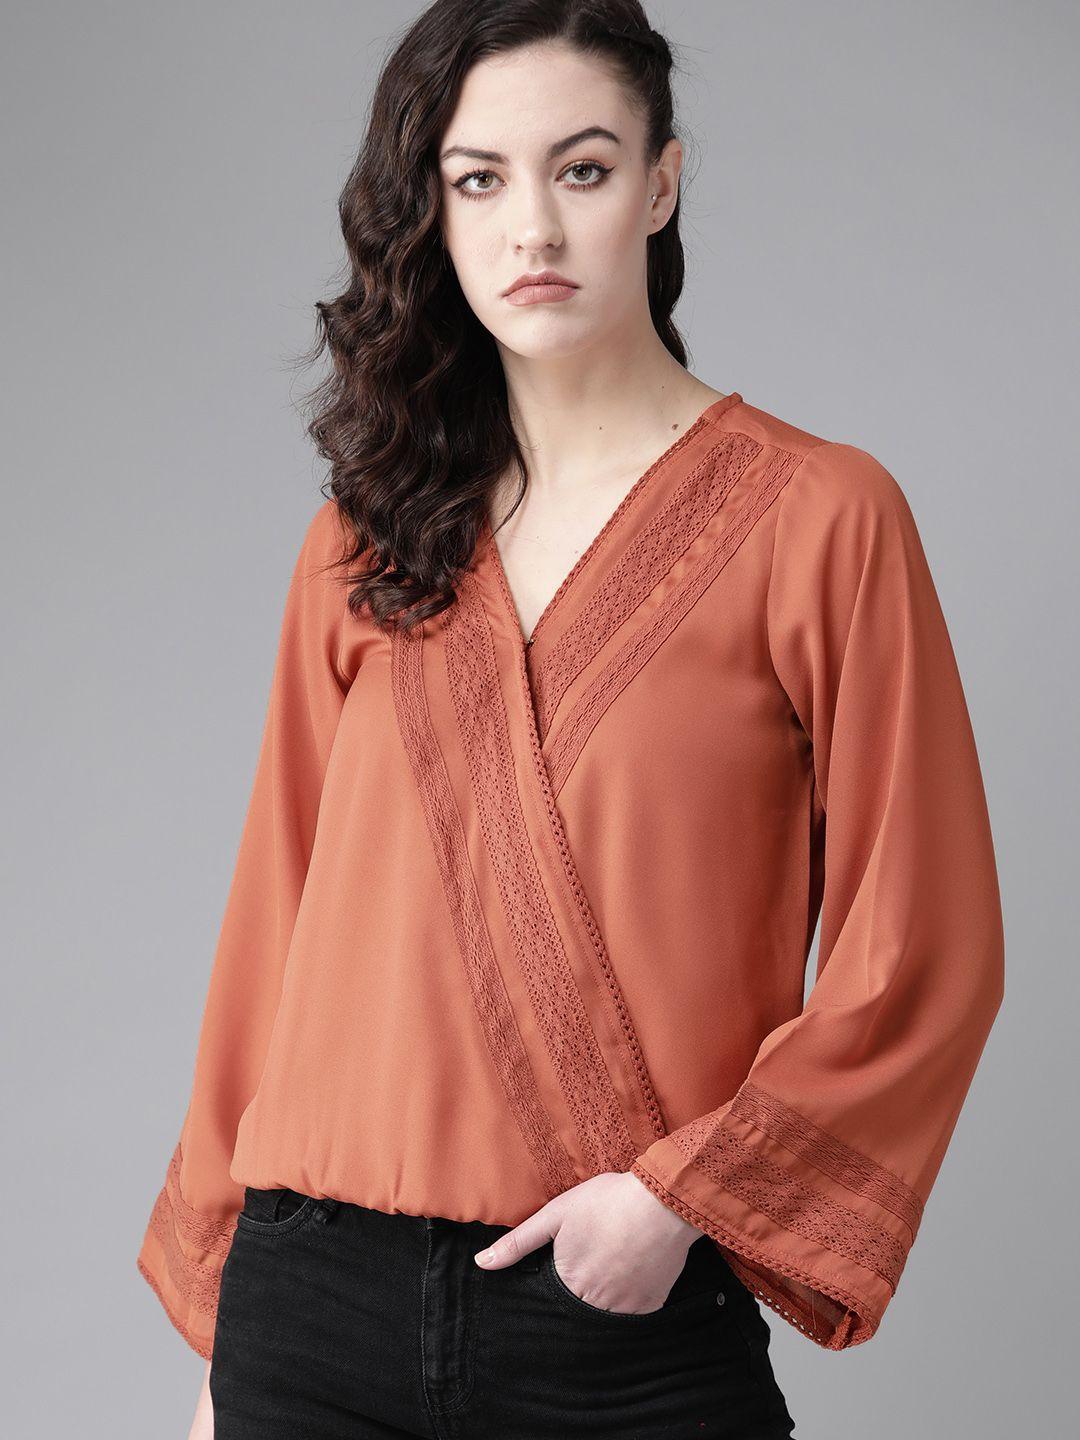 the roadster lifestyle co women rust orange solid lace insert wrap top